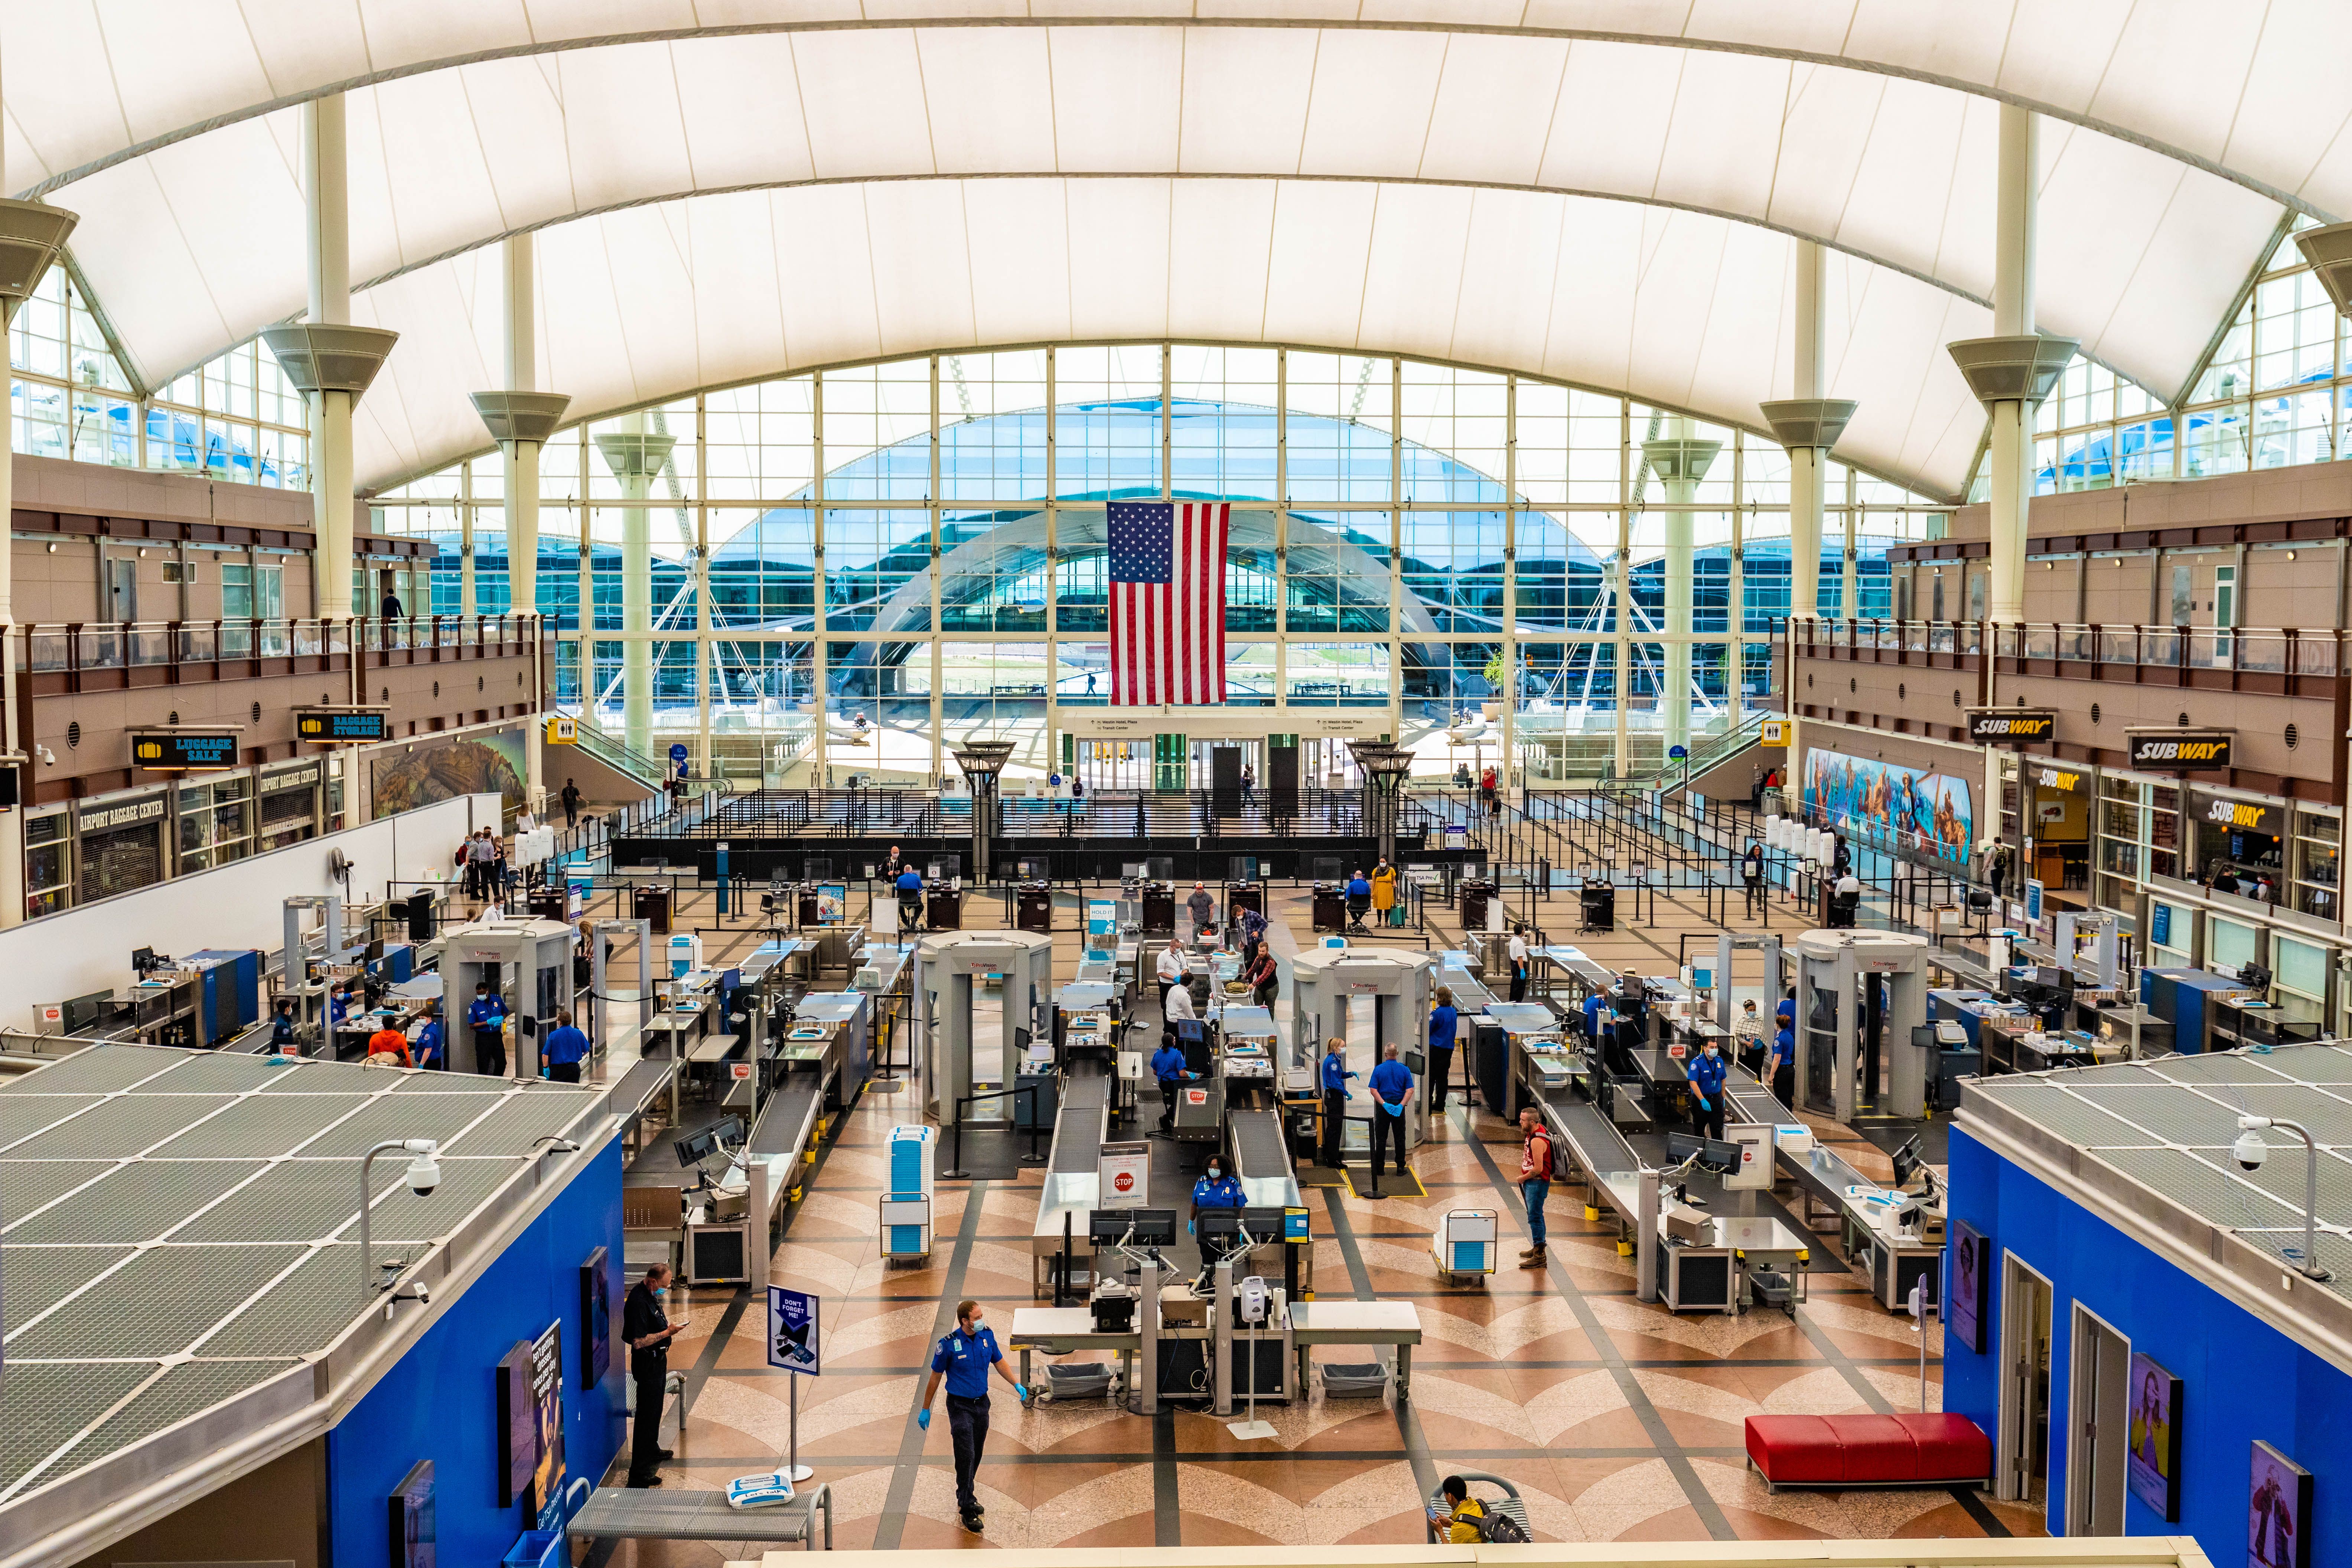 Denver International Airport's current security spaces